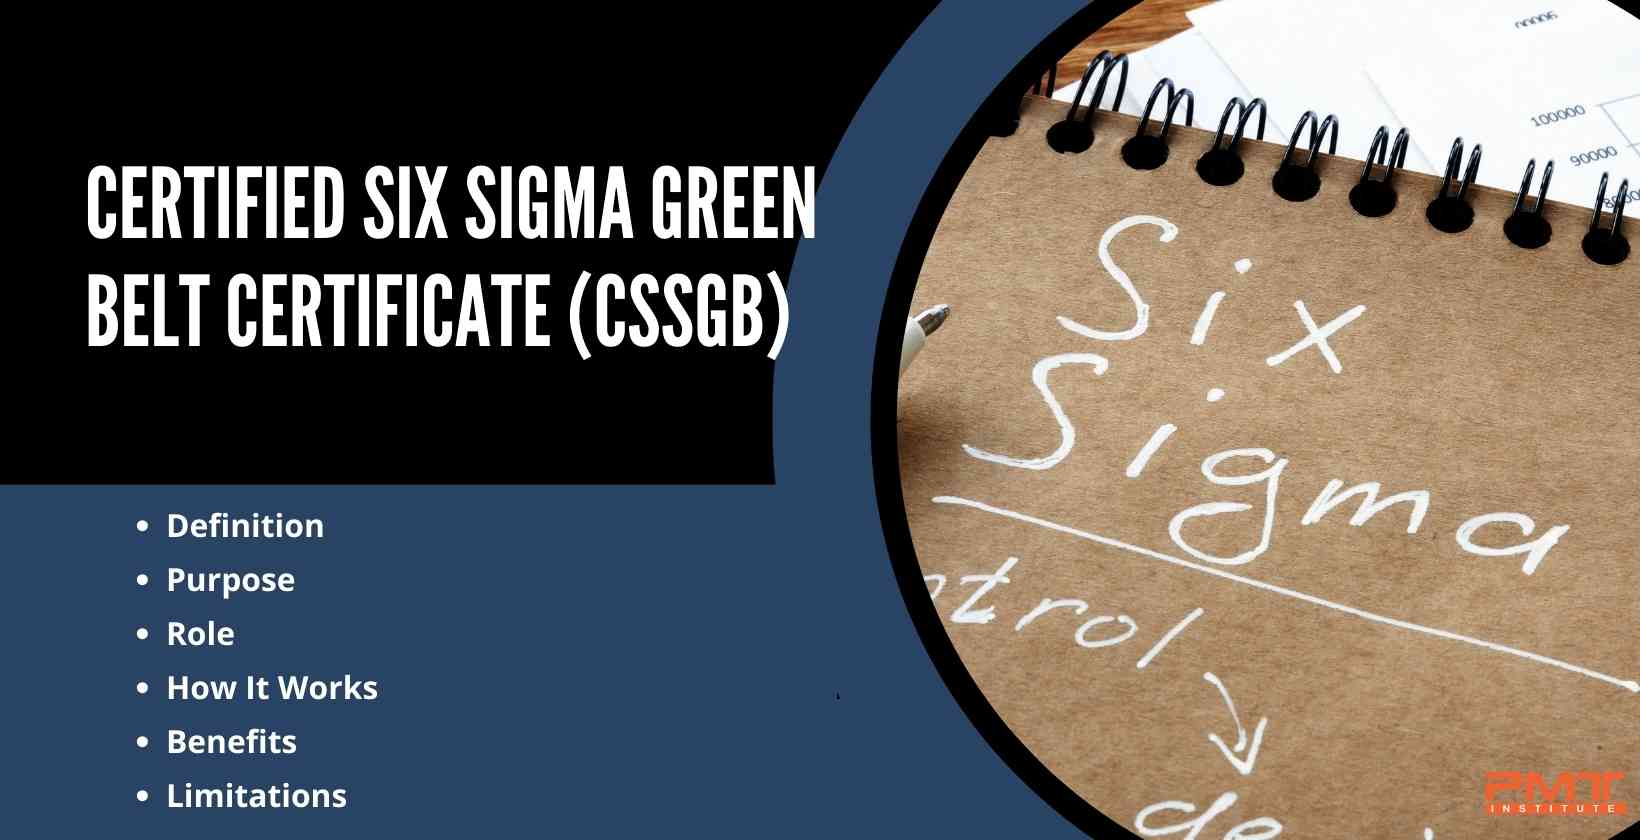 Certified Six Sigma Green Belt Certificate (CSSGB): Definition, Purpose, Role, How Does It Work, Benefits and Limitations